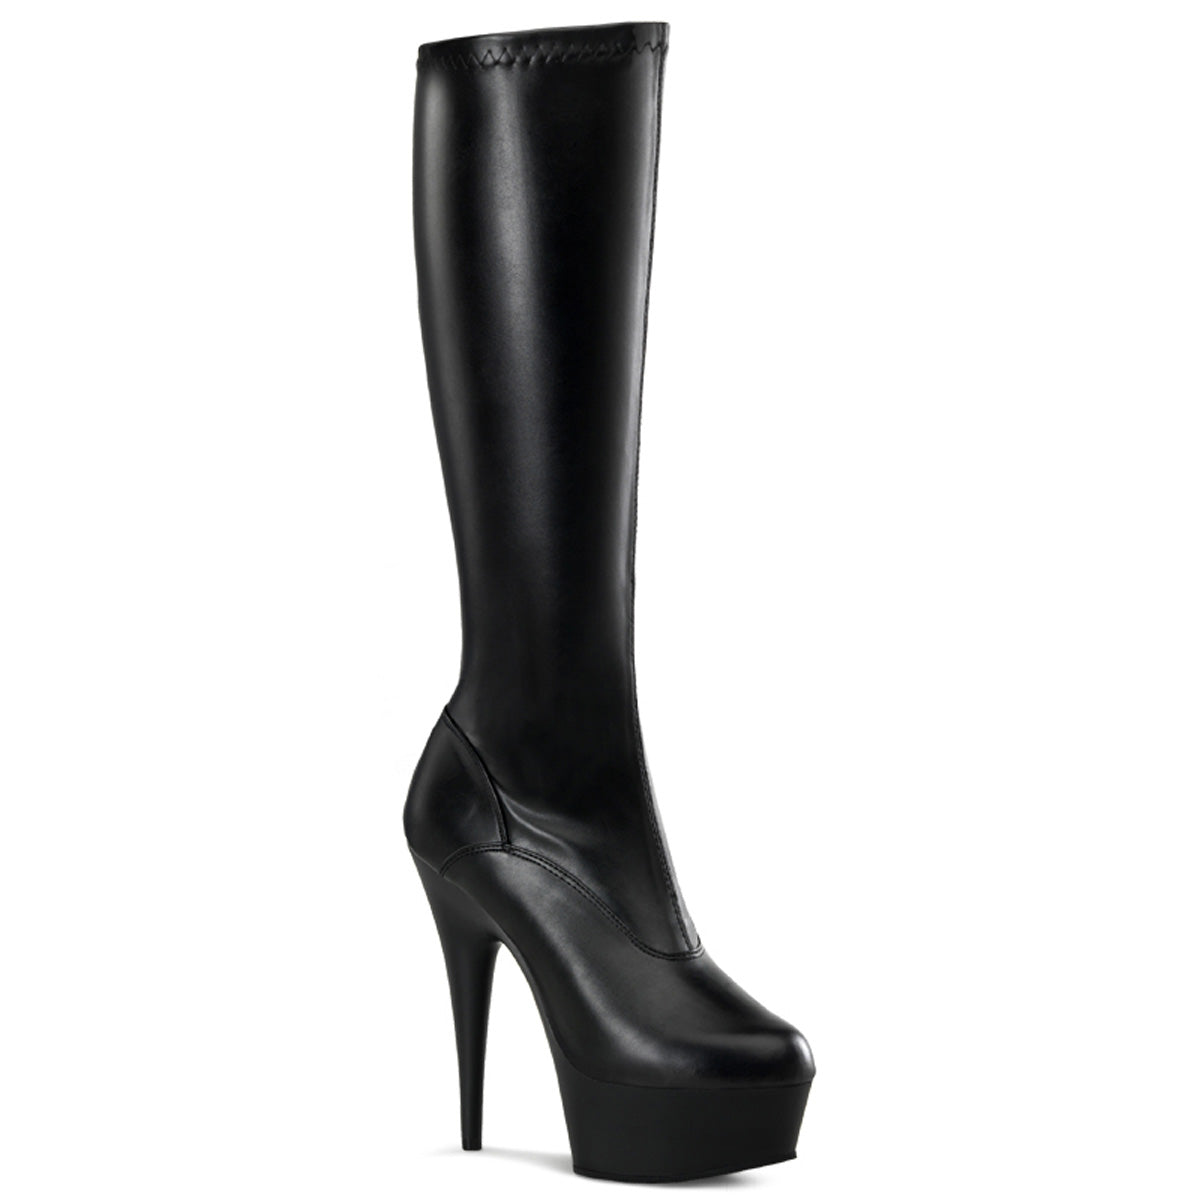 DELIGHT-2000 Black Stretch Faux Leather Knee Boot Pleaser